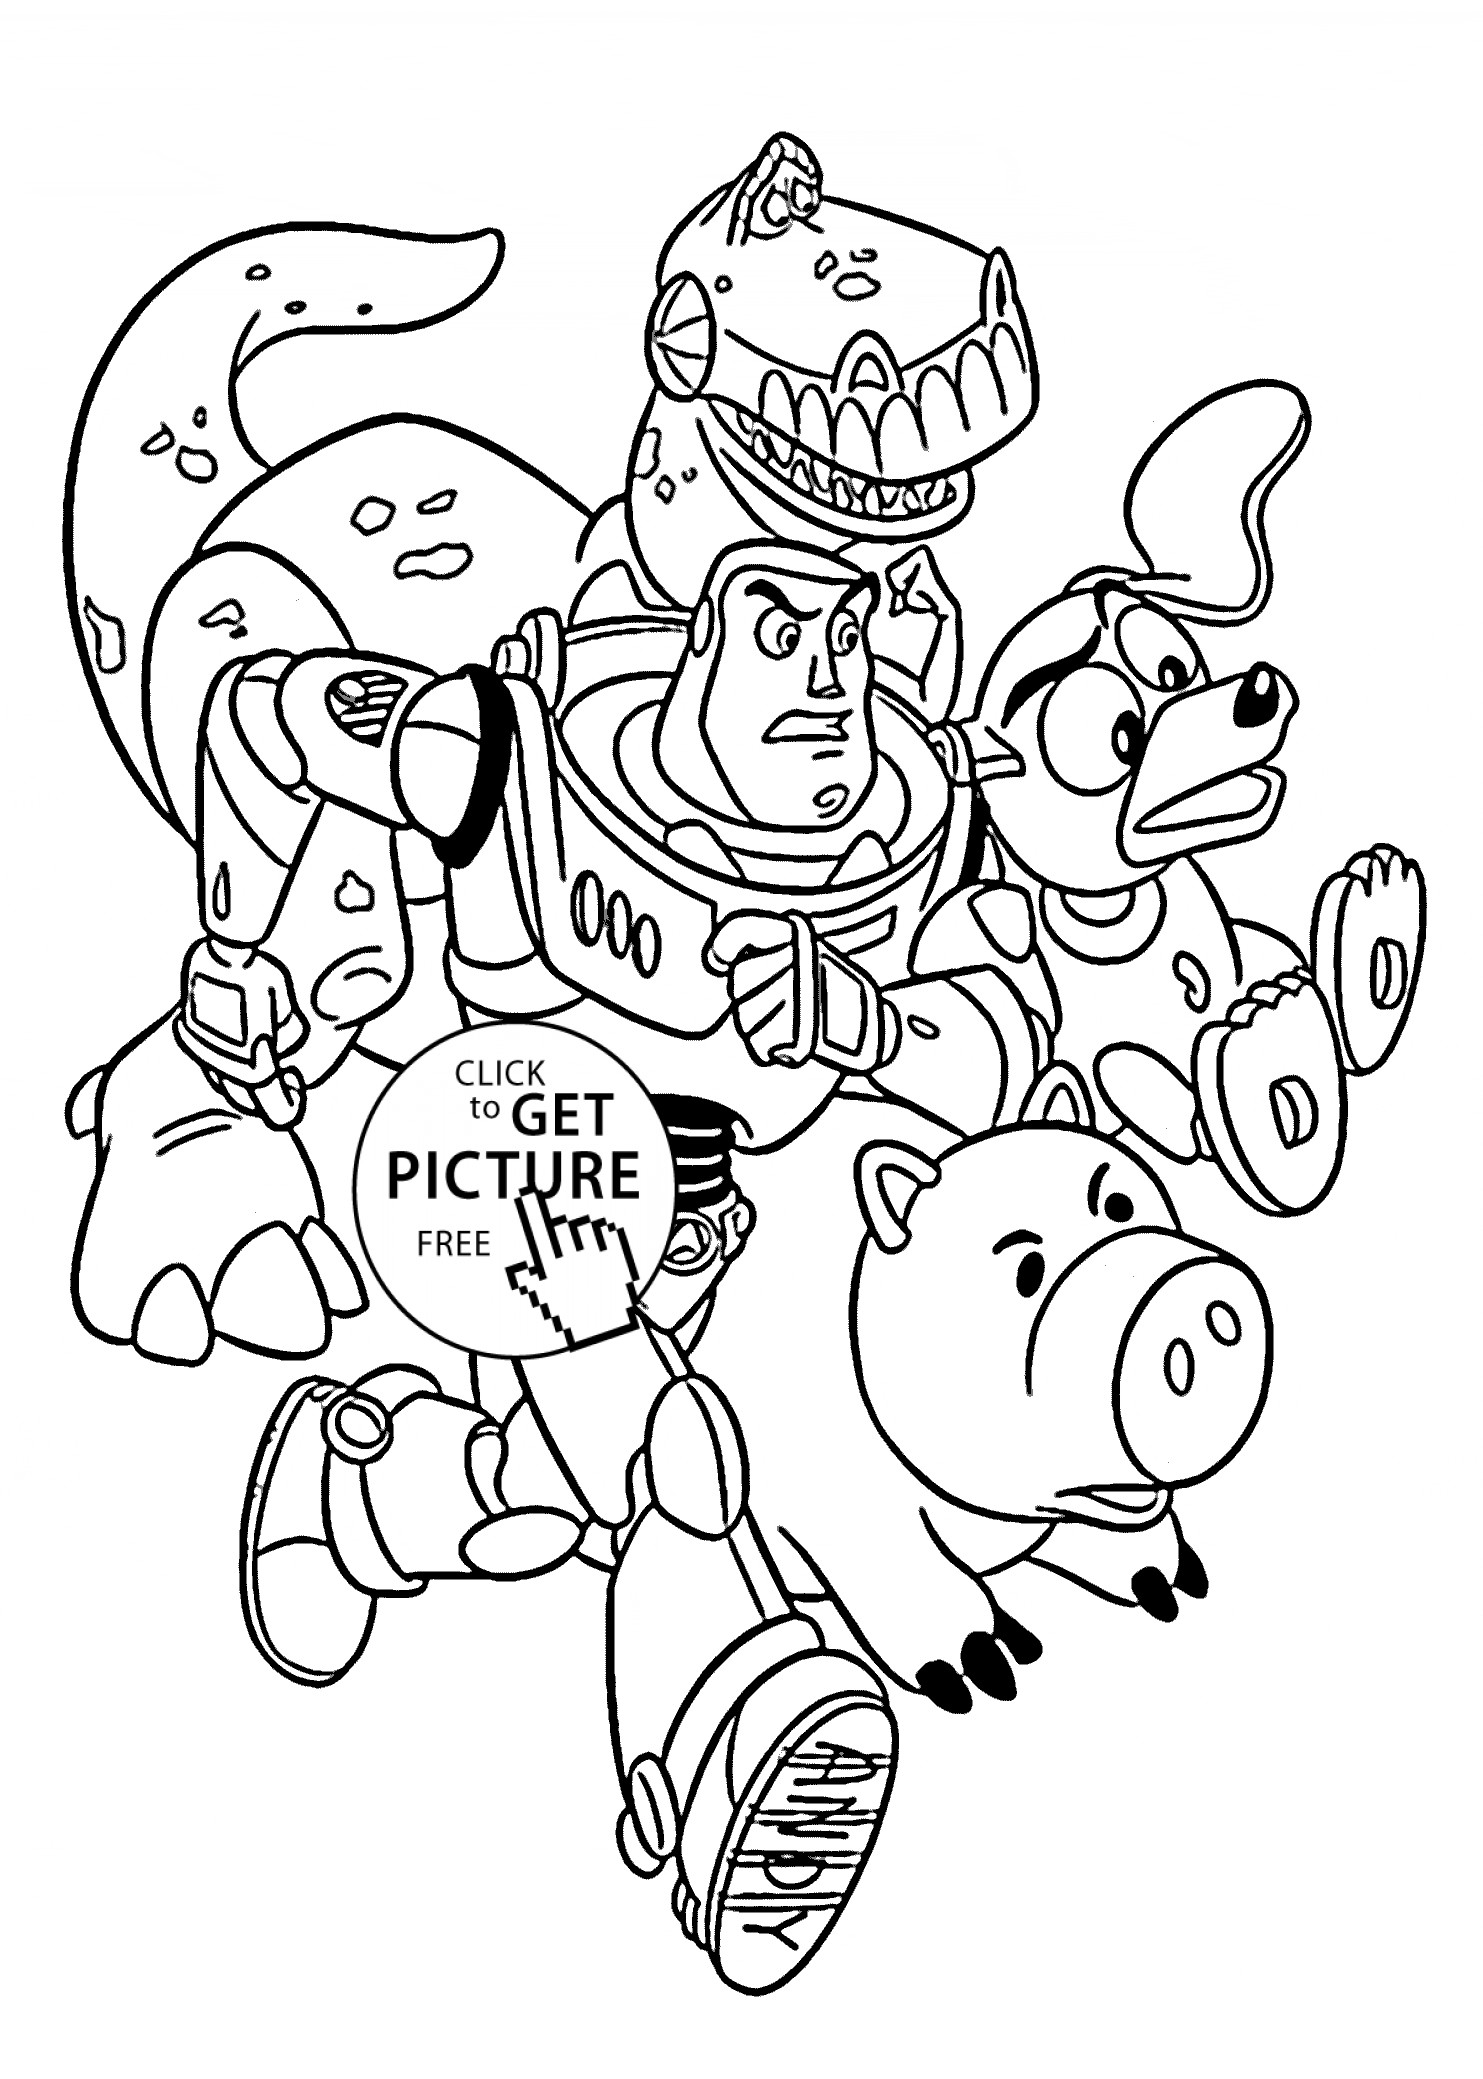 Kids Coloring Page
 Rescue from Toy story coloring pages for kids printable